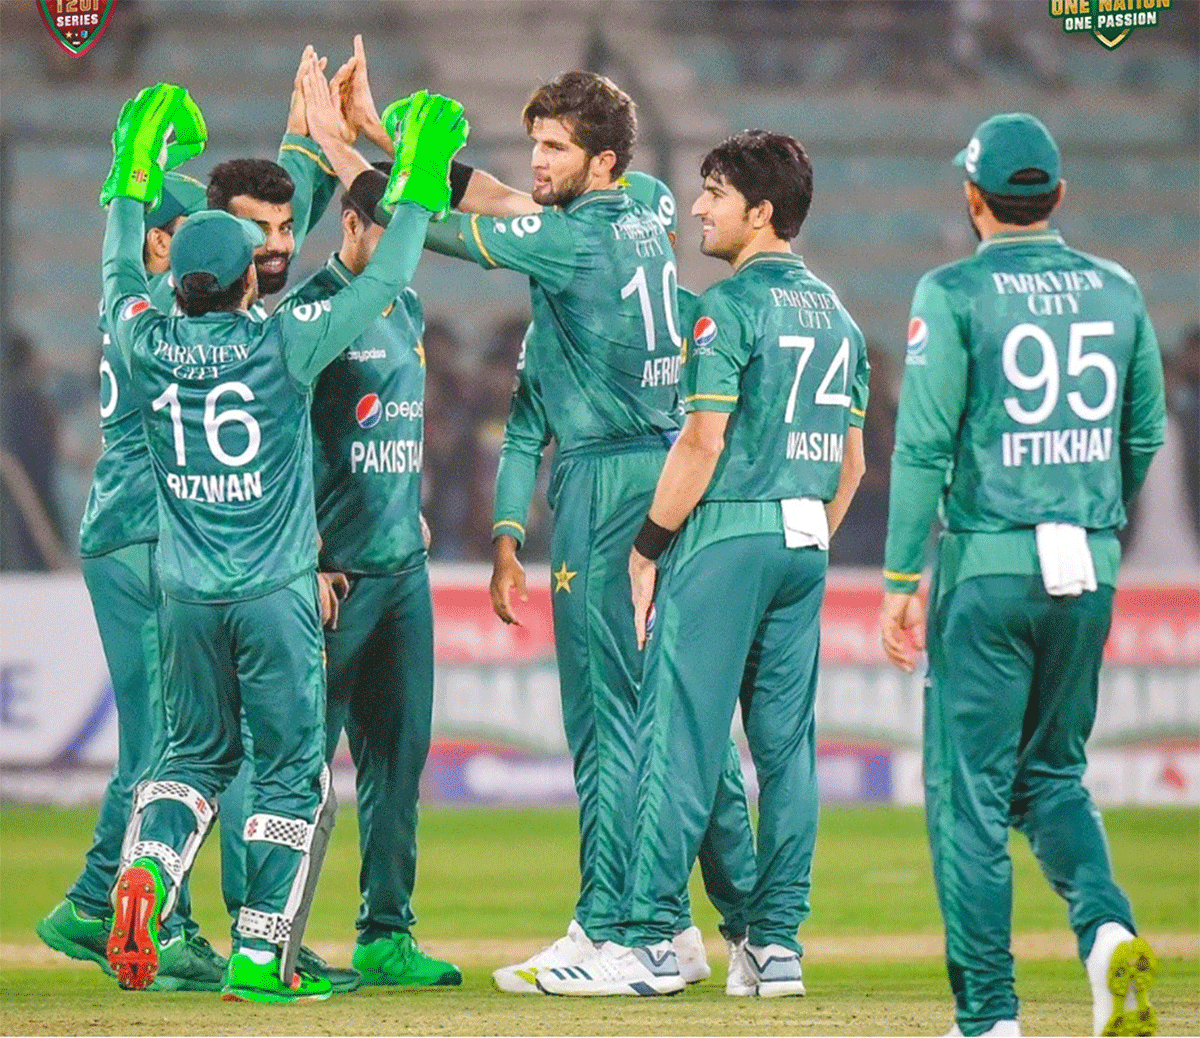 Shaheen Shah Afridi celebrates with teammates after taking a wicket in the 2nd T20I against West Indies in Karachi on Tuesday